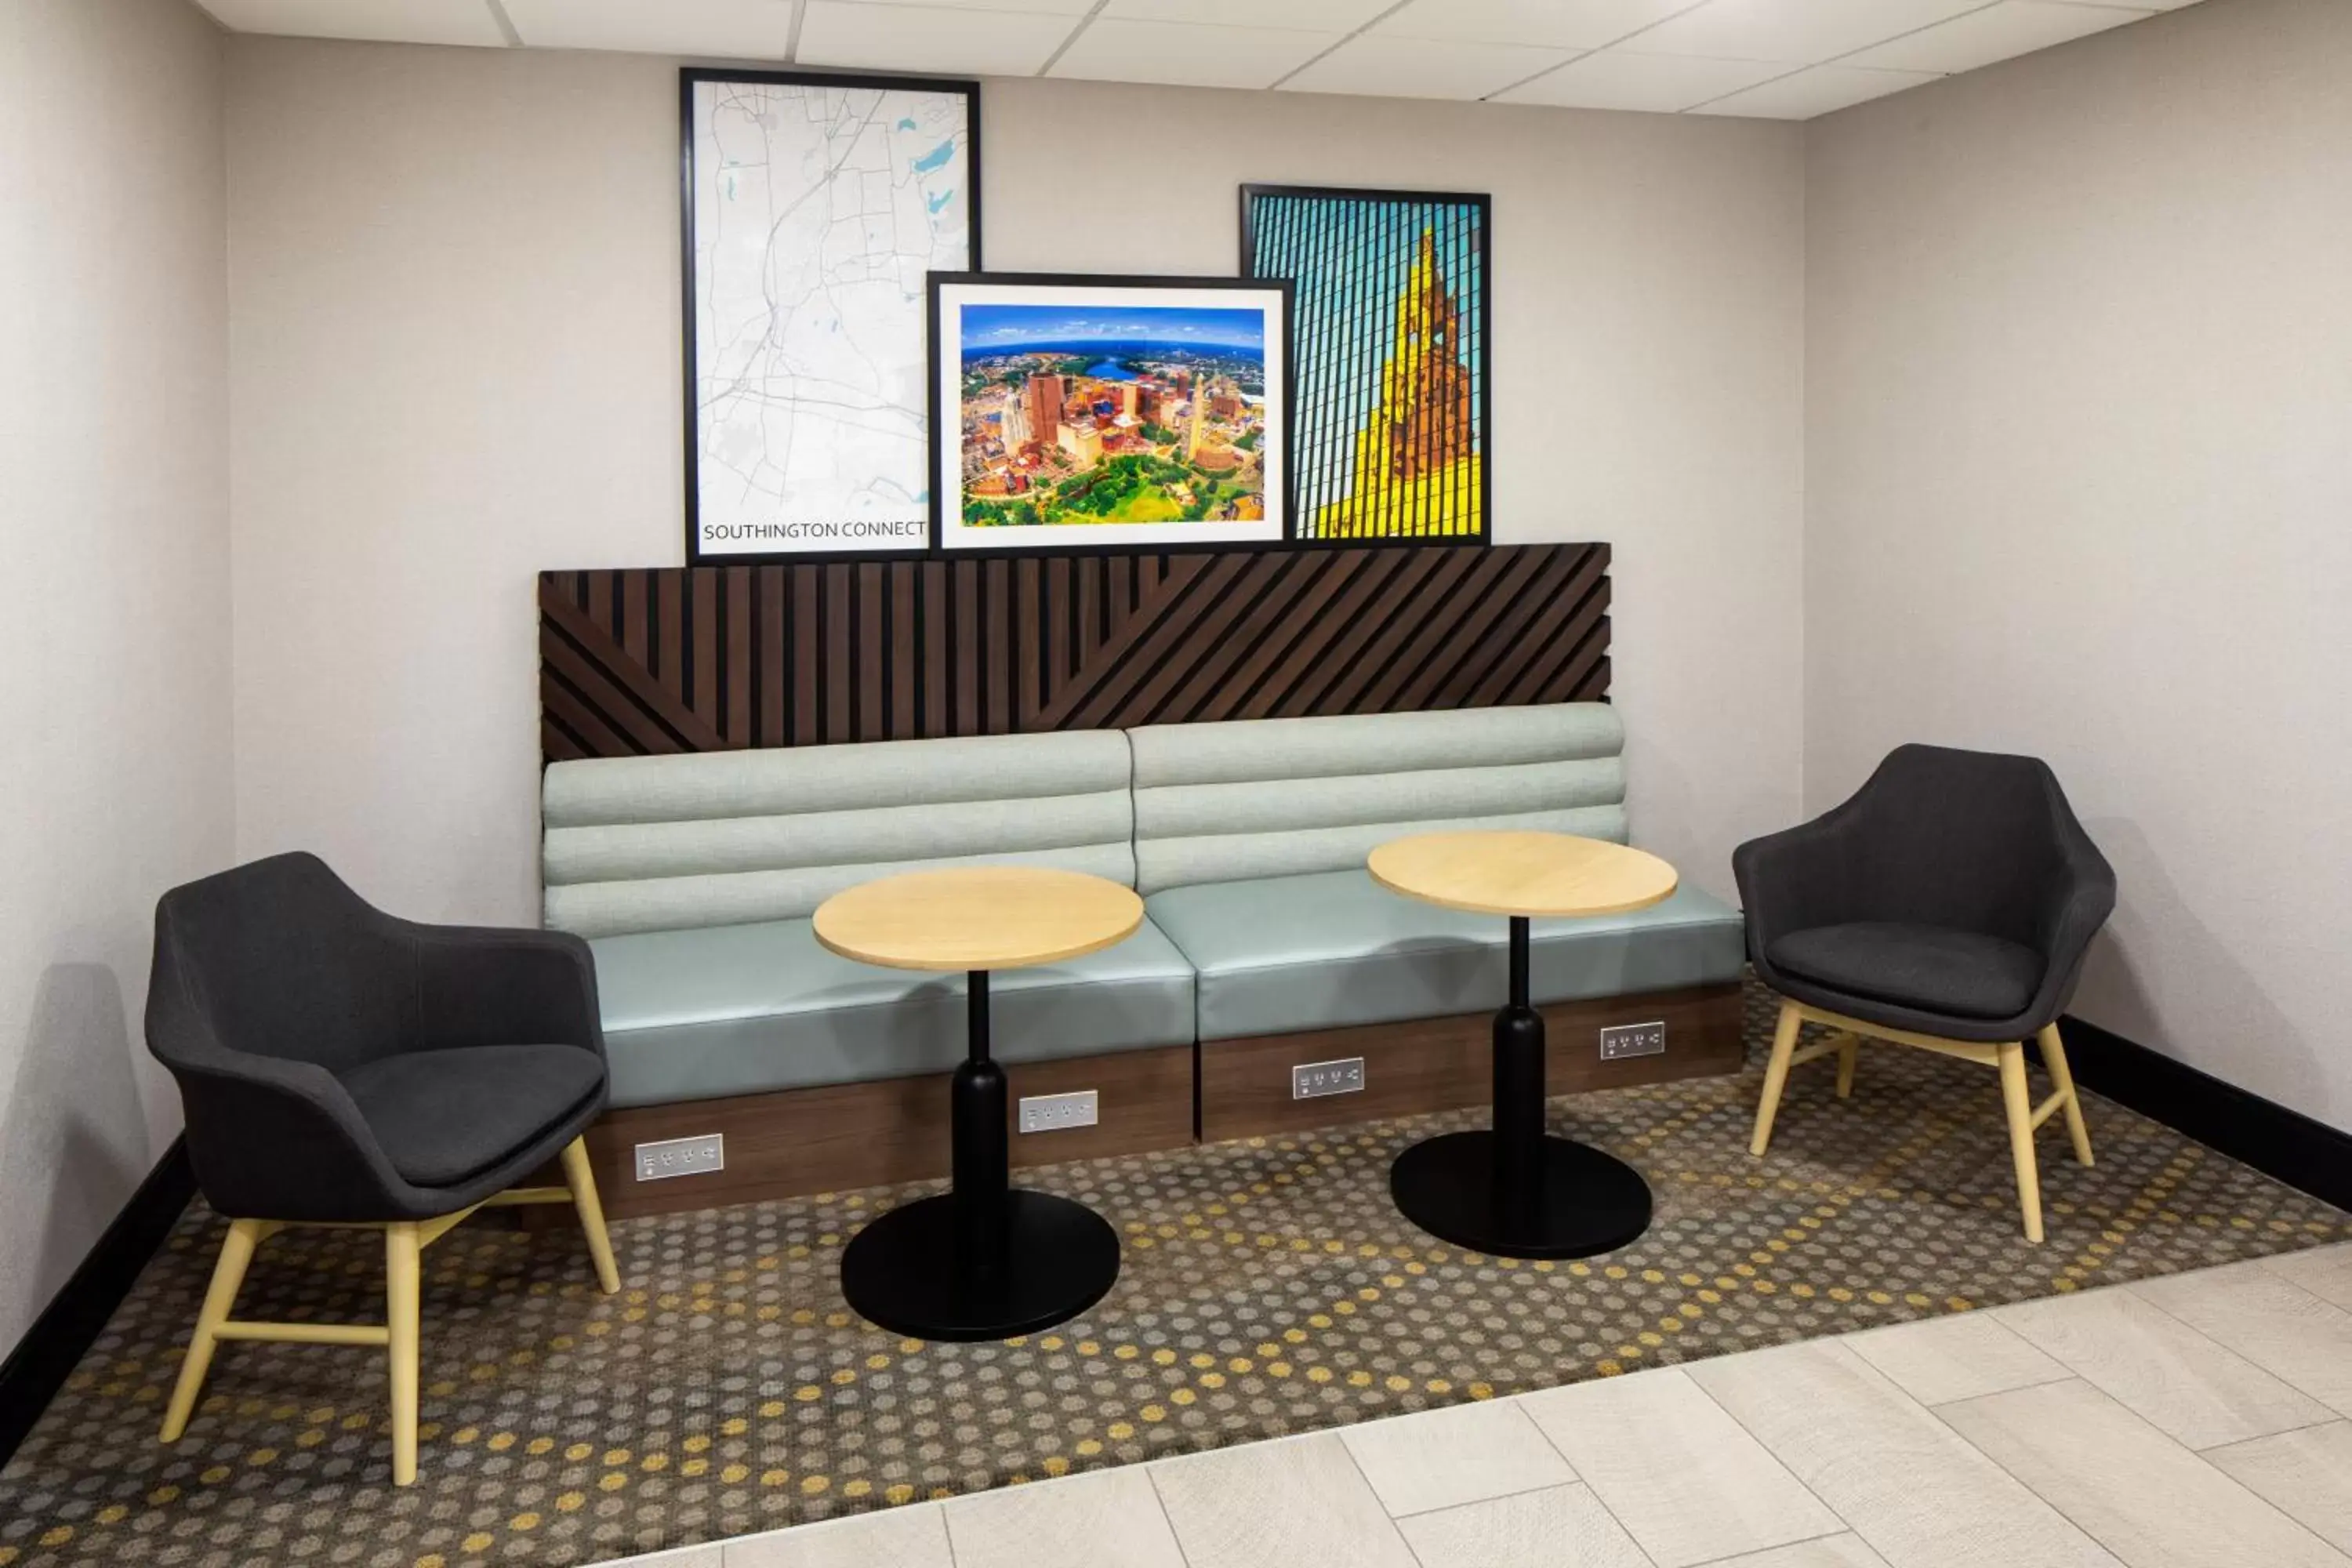 Property building, Seating Area in Holiday Inn - Cheshire - Southington, an IHG Hotel